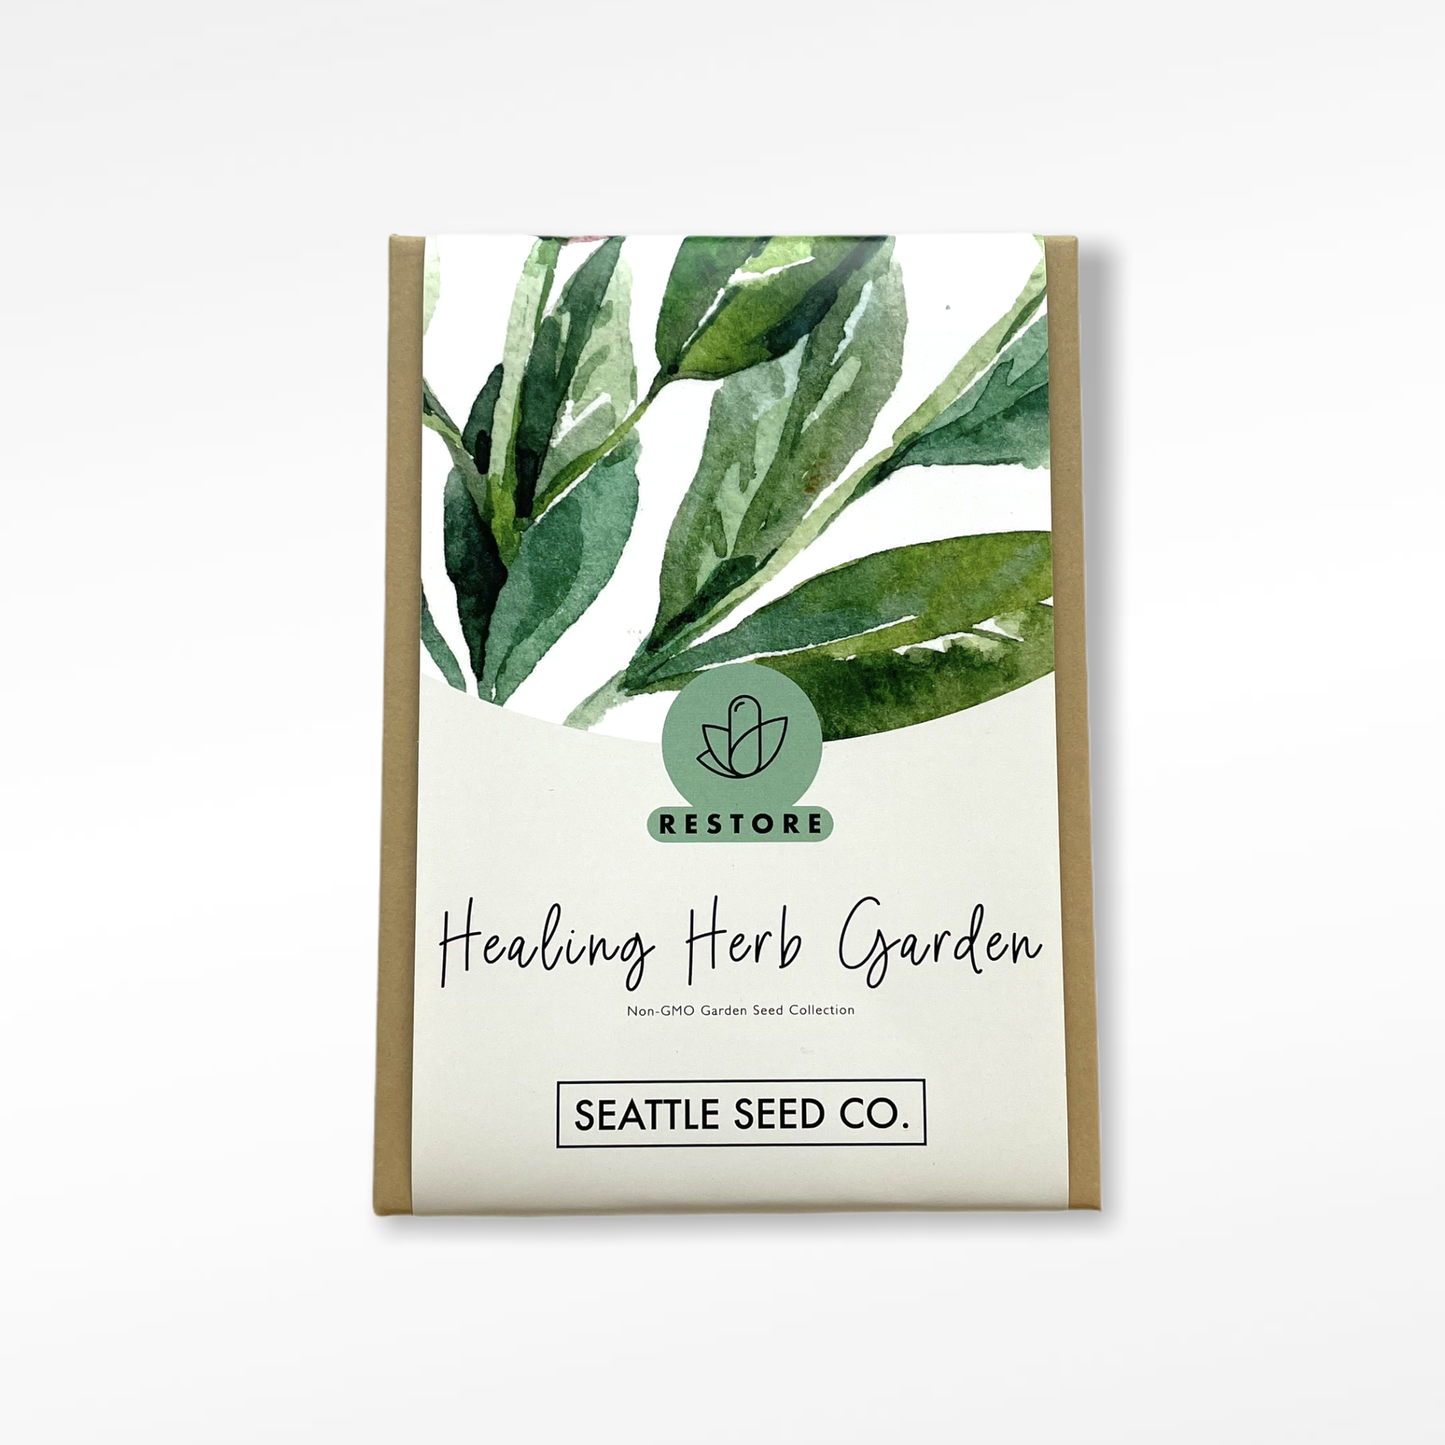 Seattle Seed Co. - Non-GMO Seed Collection - Healing Herb Garden